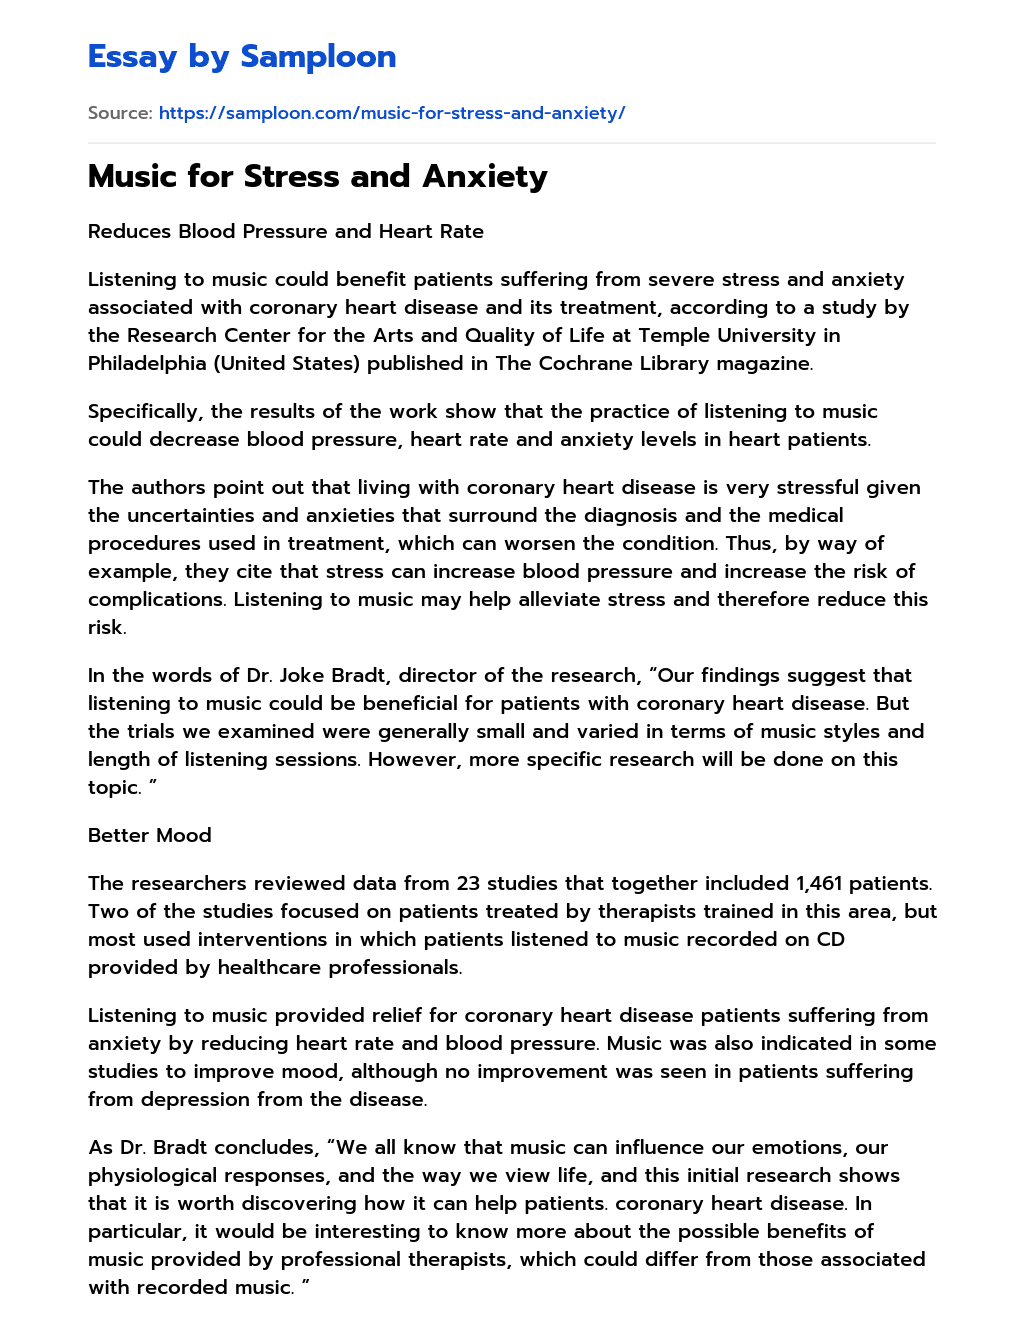 Music for Stress and Anxiety essay